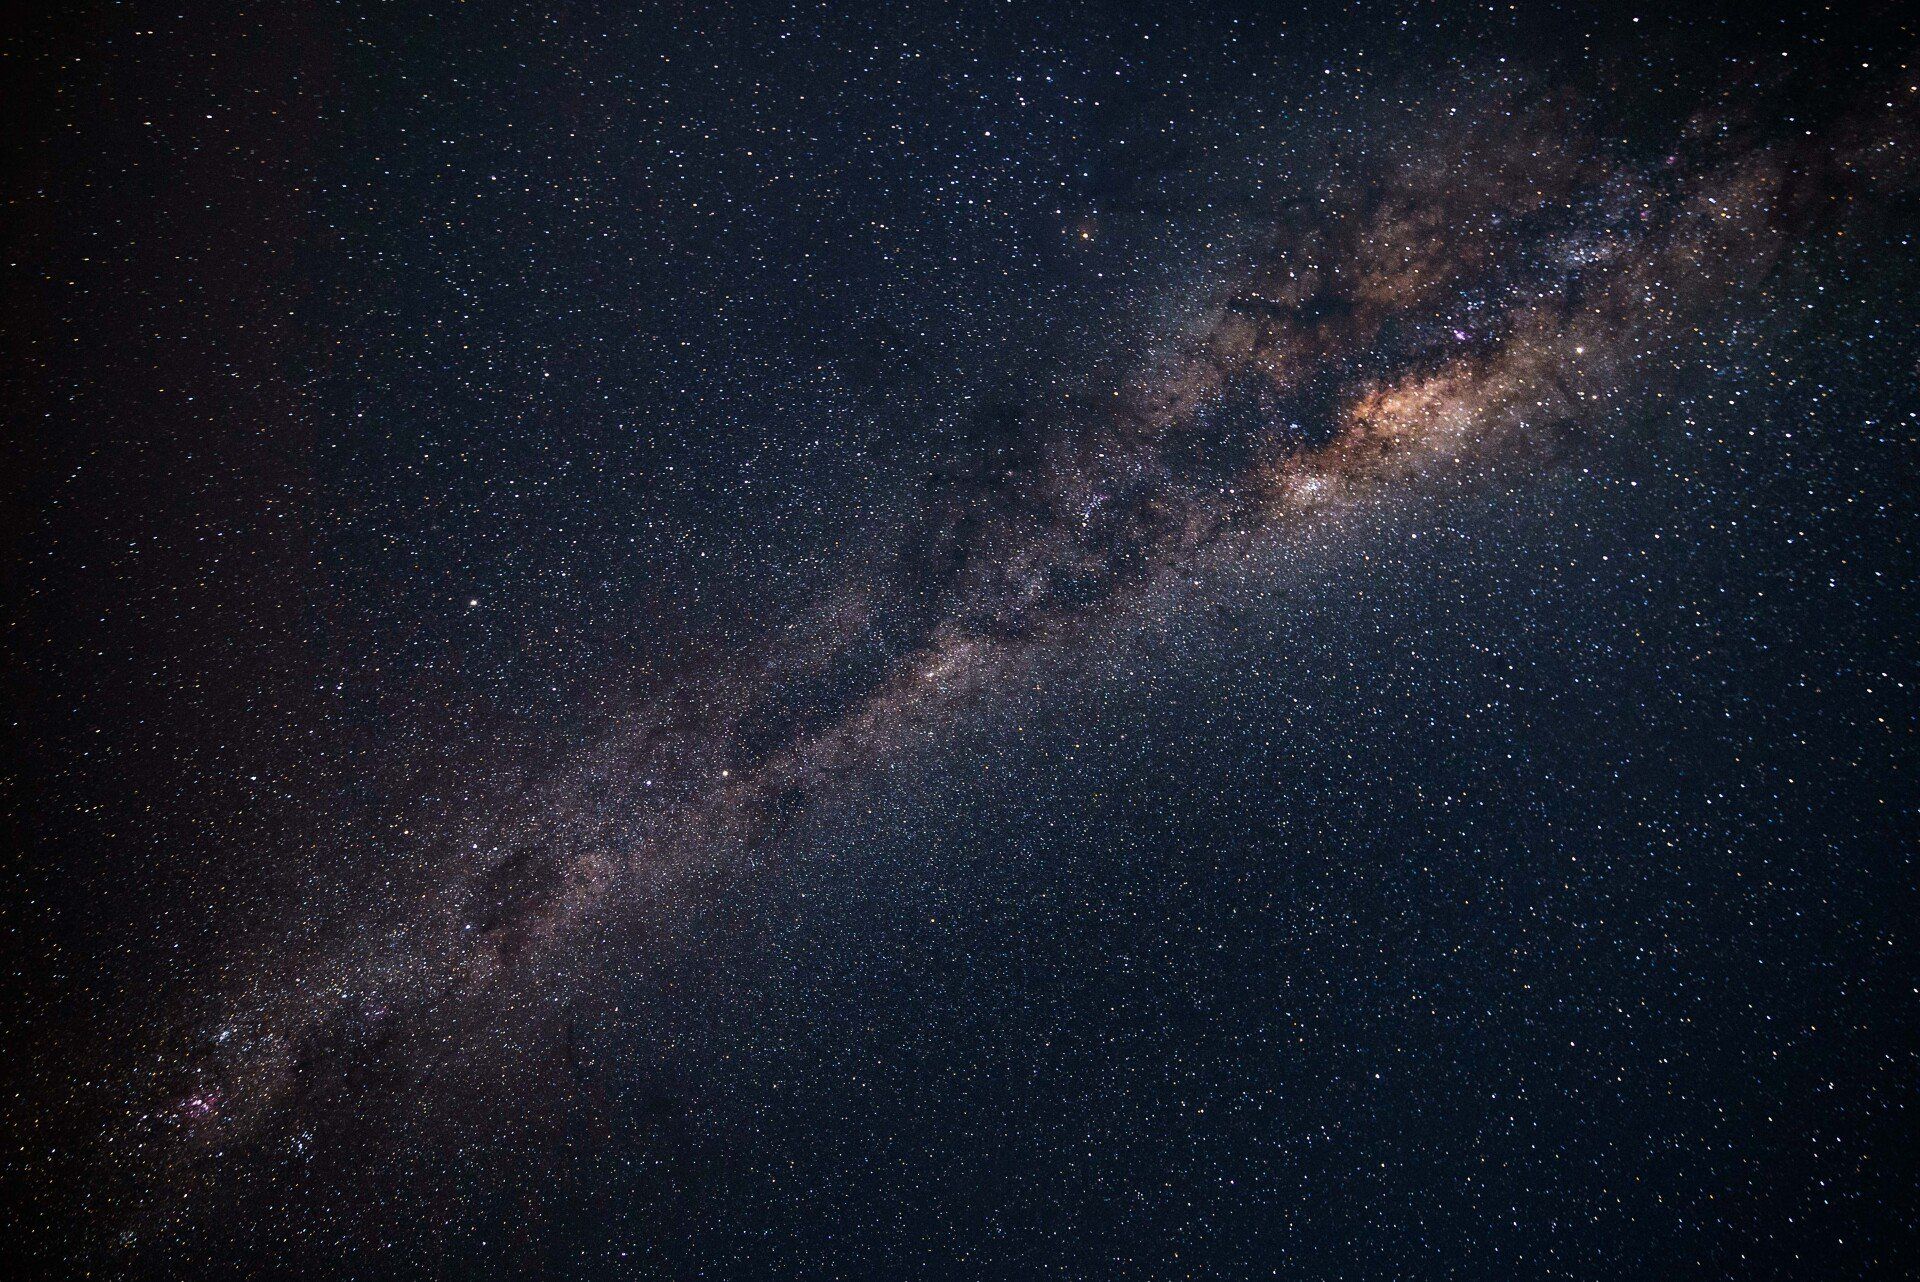 The milky way galaxy is visible in the night sky